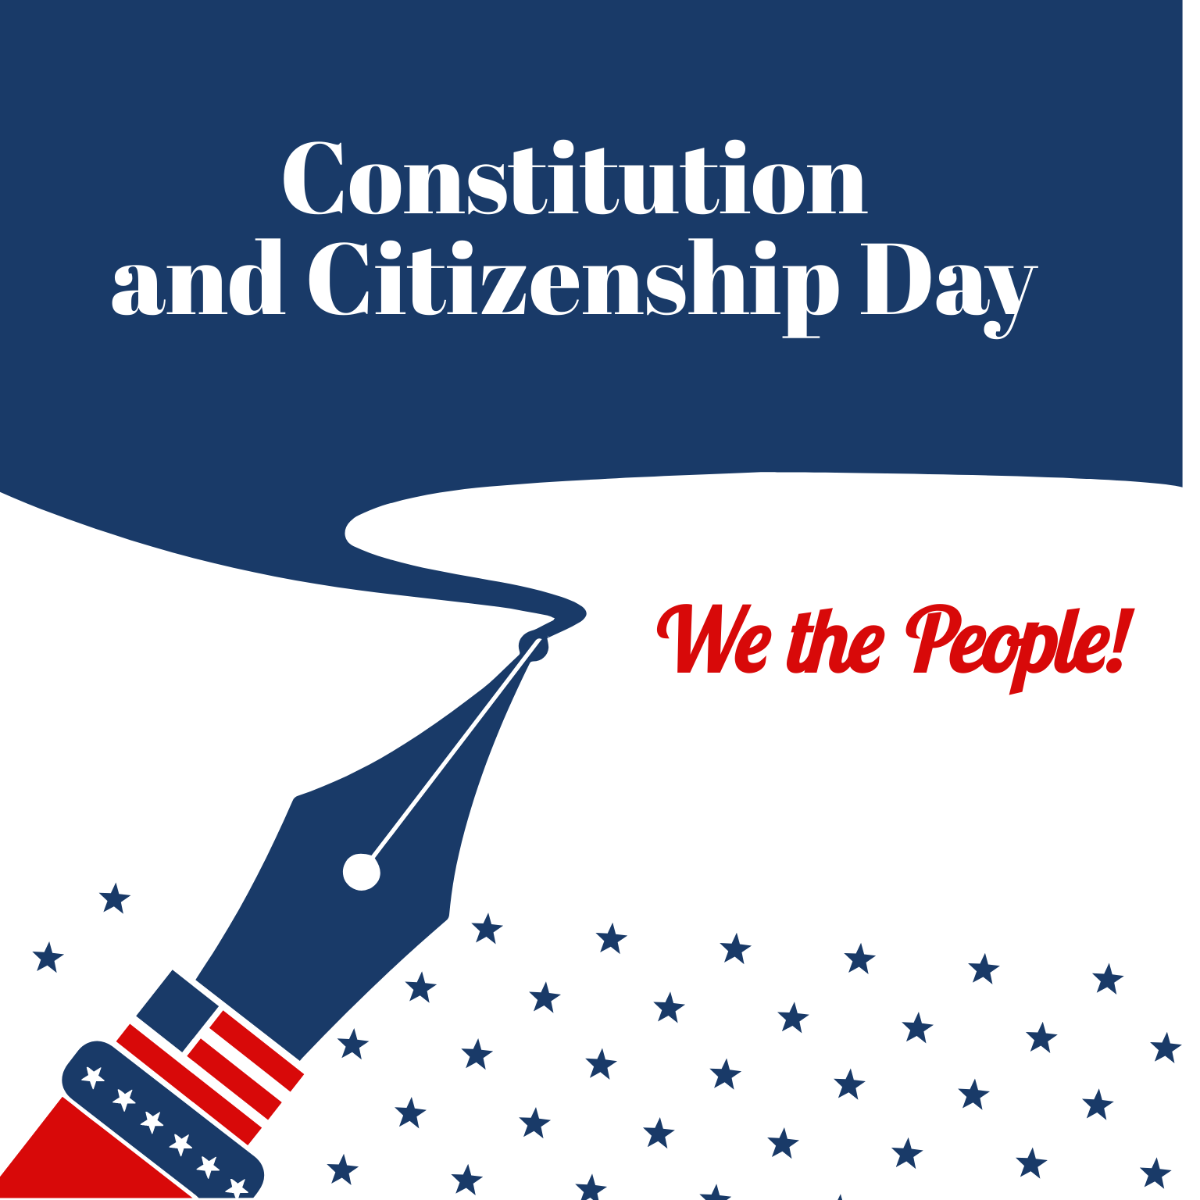 Free Constitution and Citizenship Day Vector Art Template